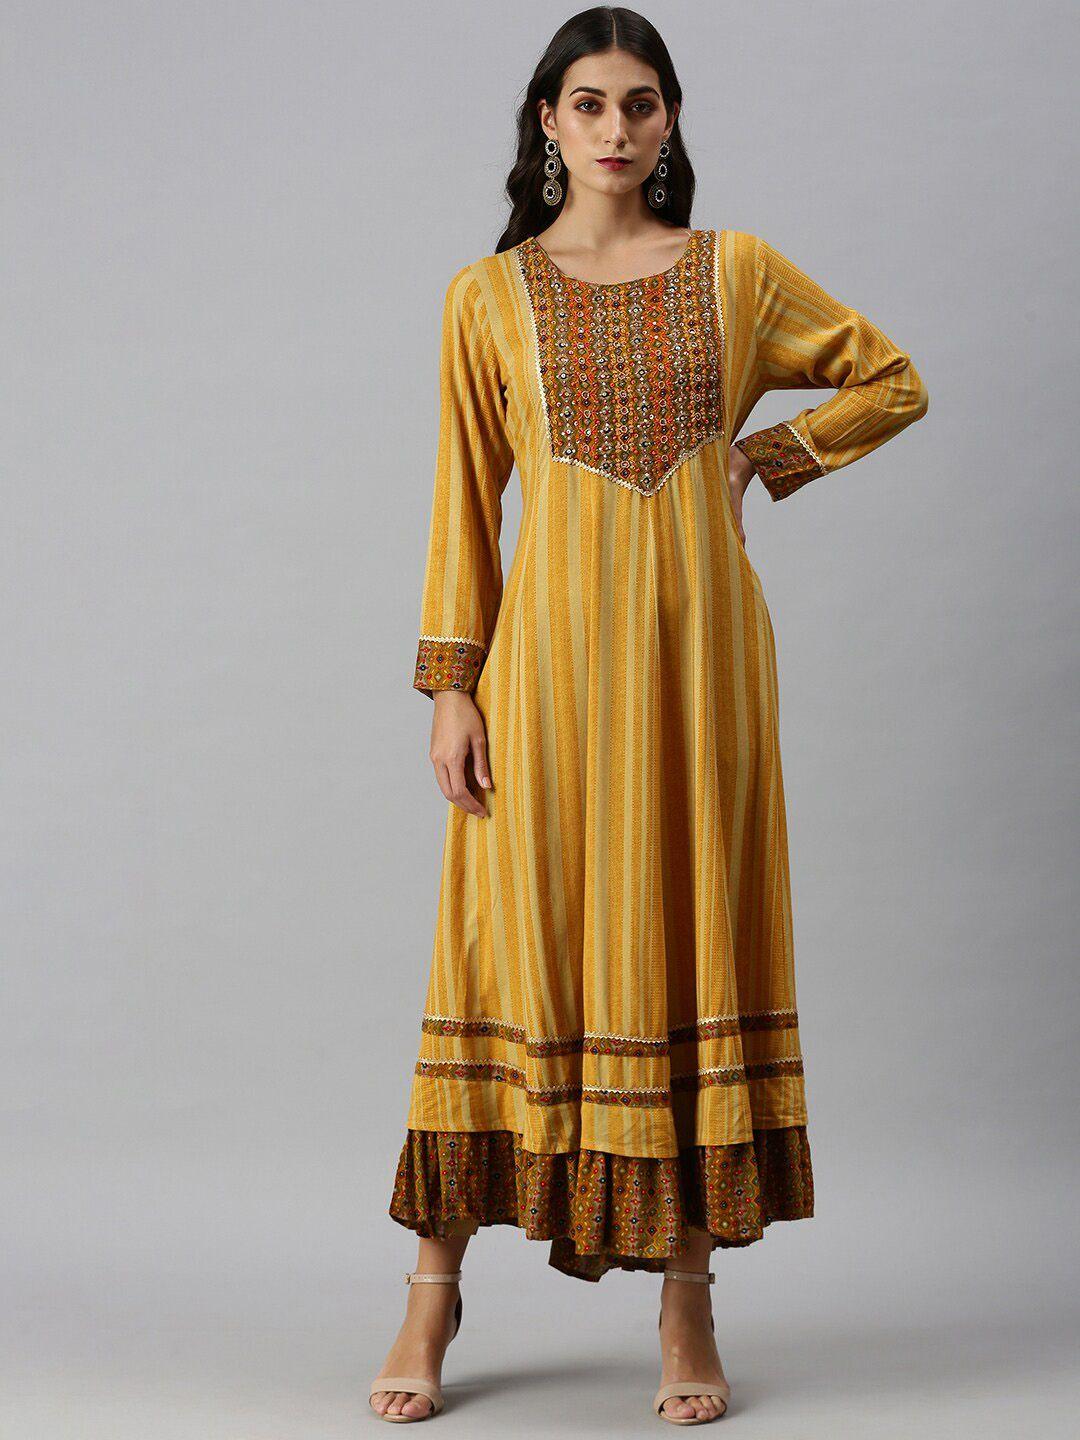 showoff-striped-embroidered-a-line-ethnic-dress